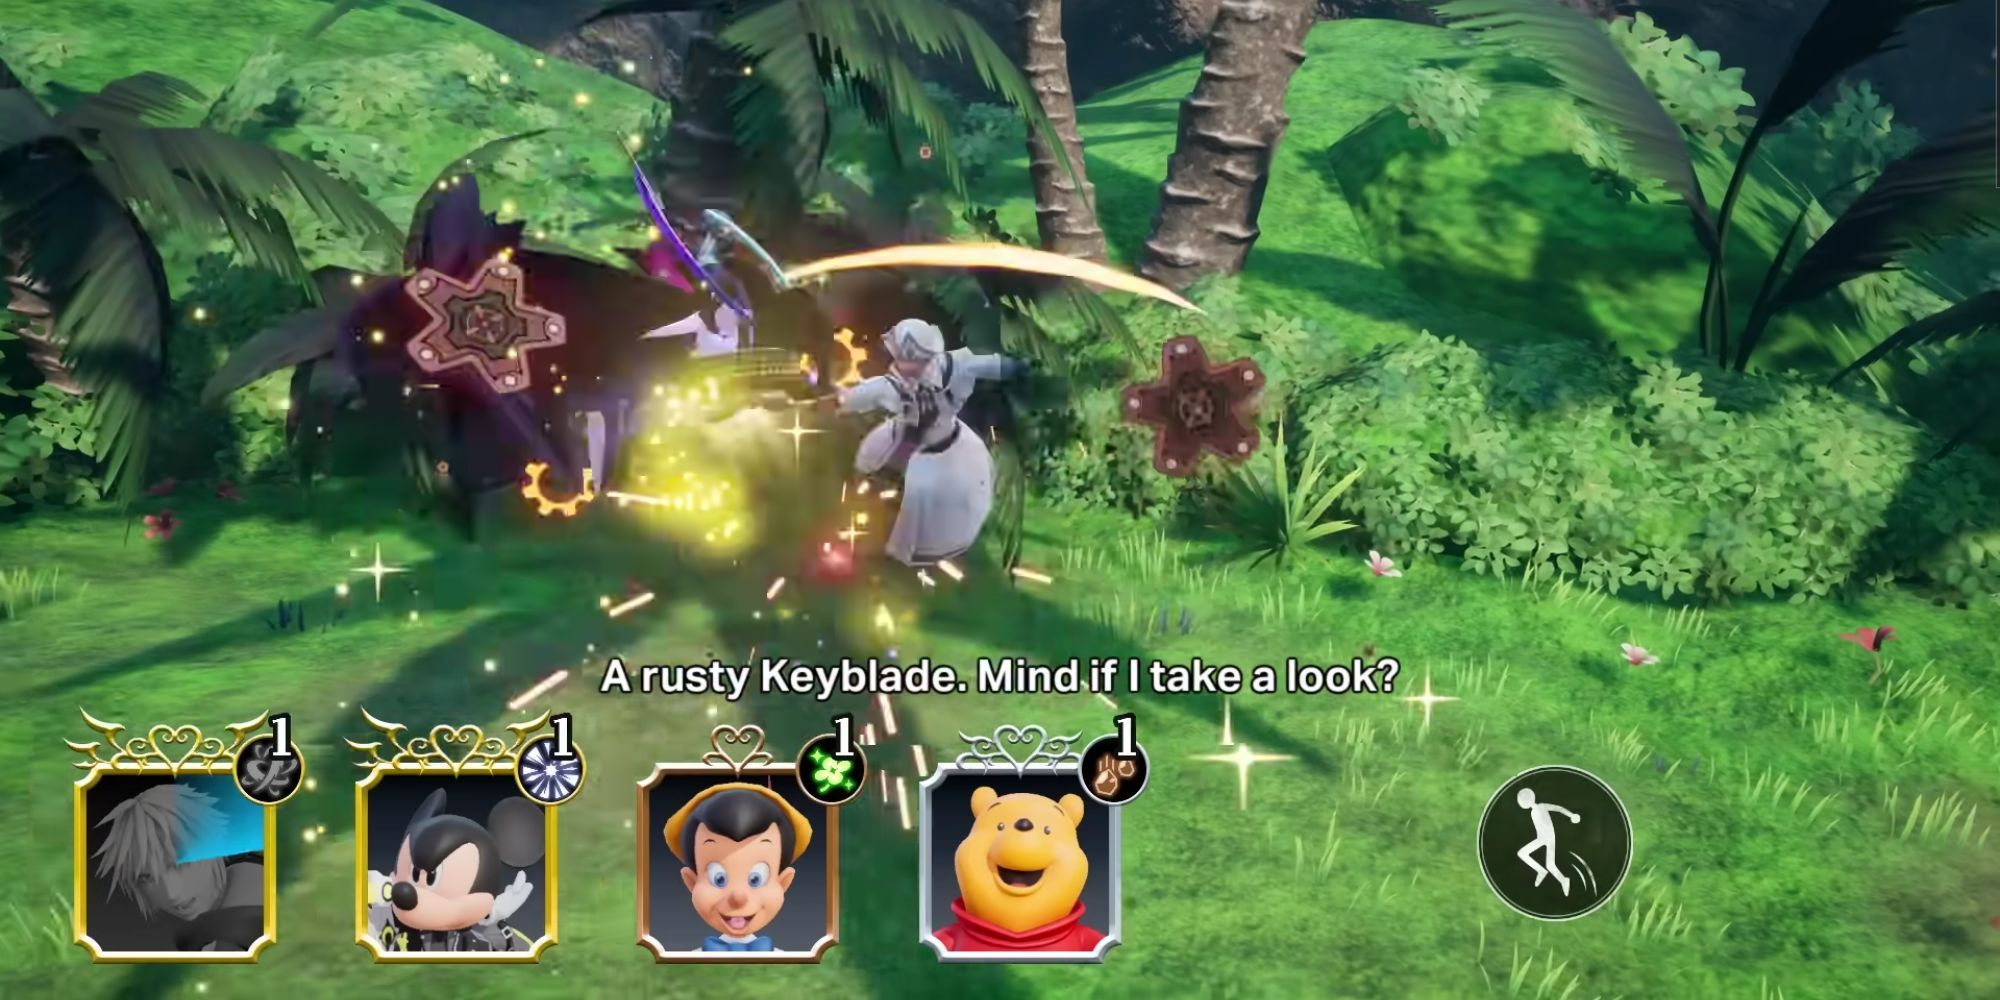 Kingdom Hearts Fans Are Wondering Where The Heck Missing Link Is